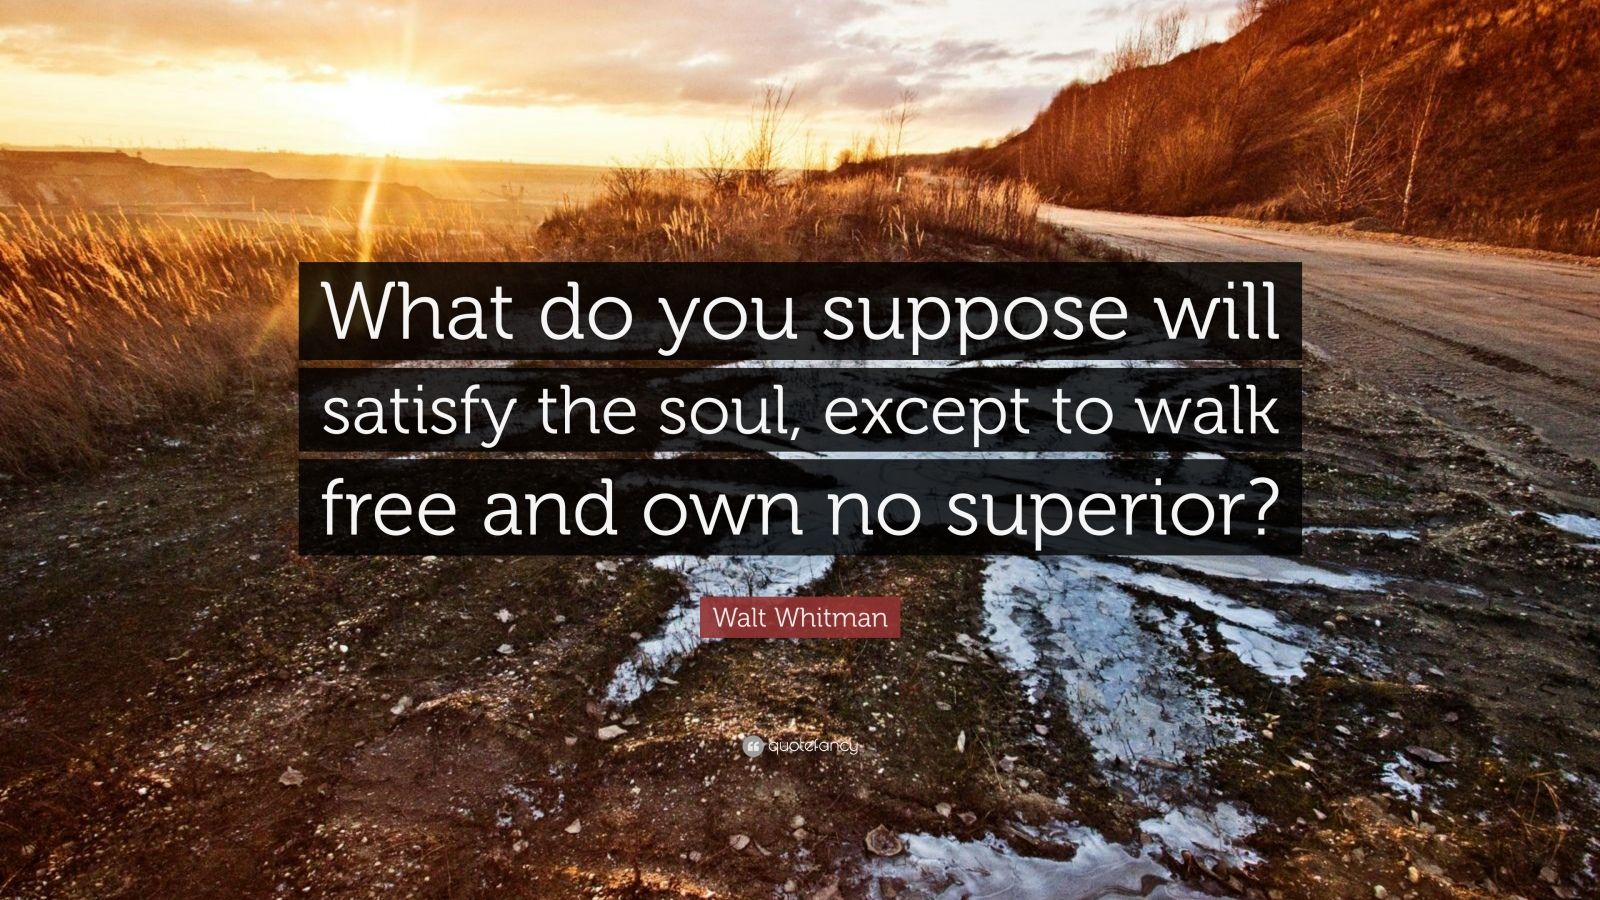 Walt Whitman Quote: “What do you suppose will satisfy the soul, except ...